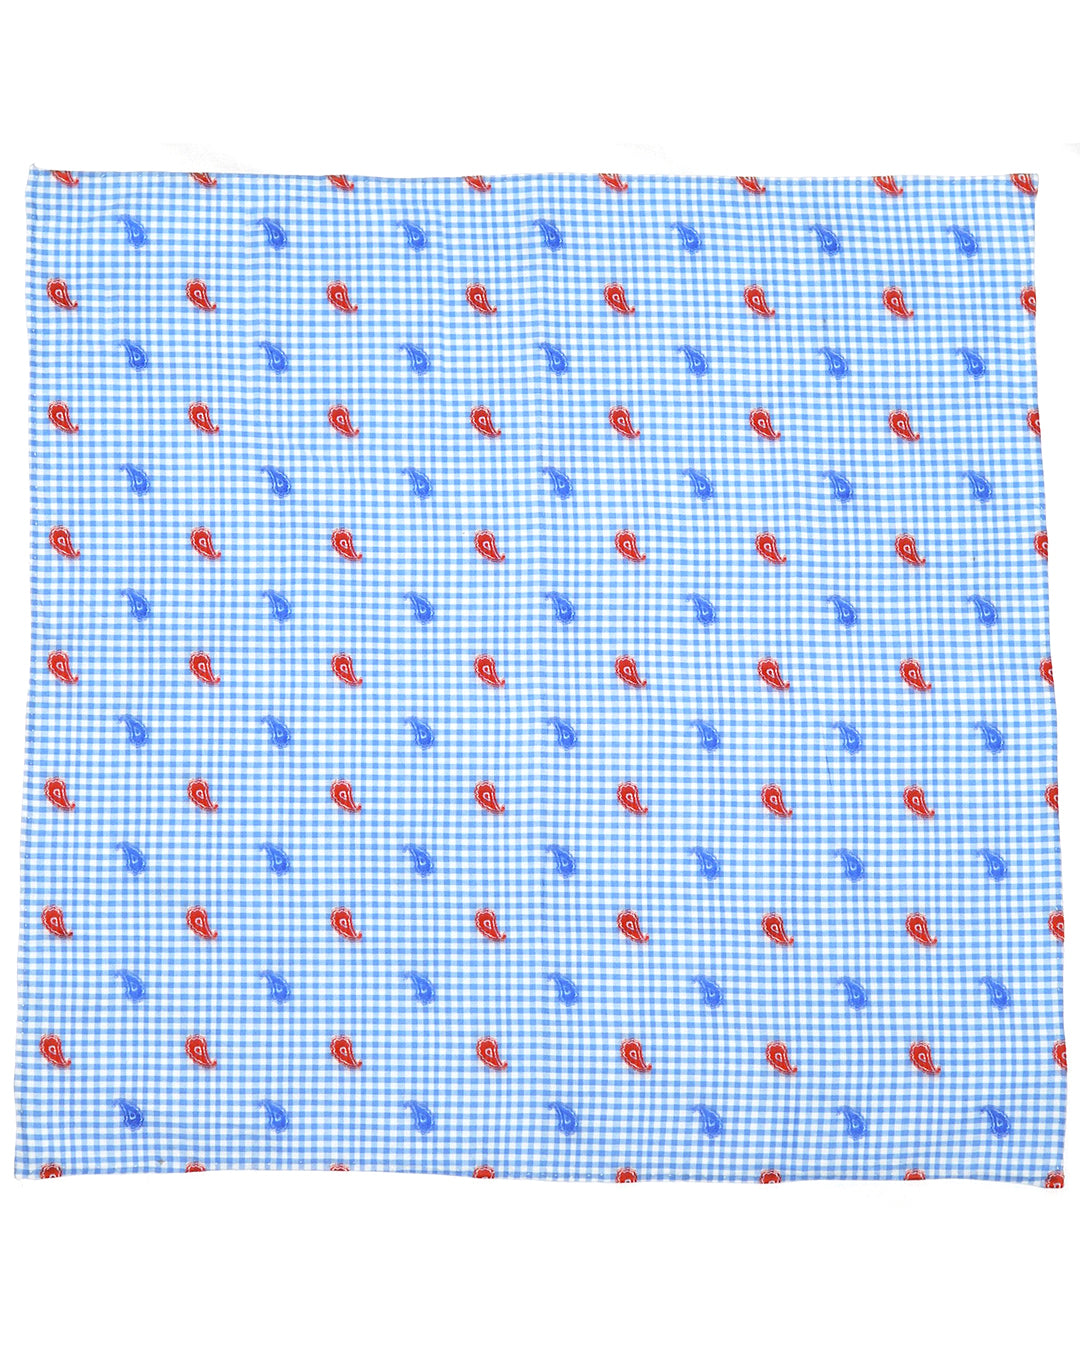 Embroidered Pocket Square 